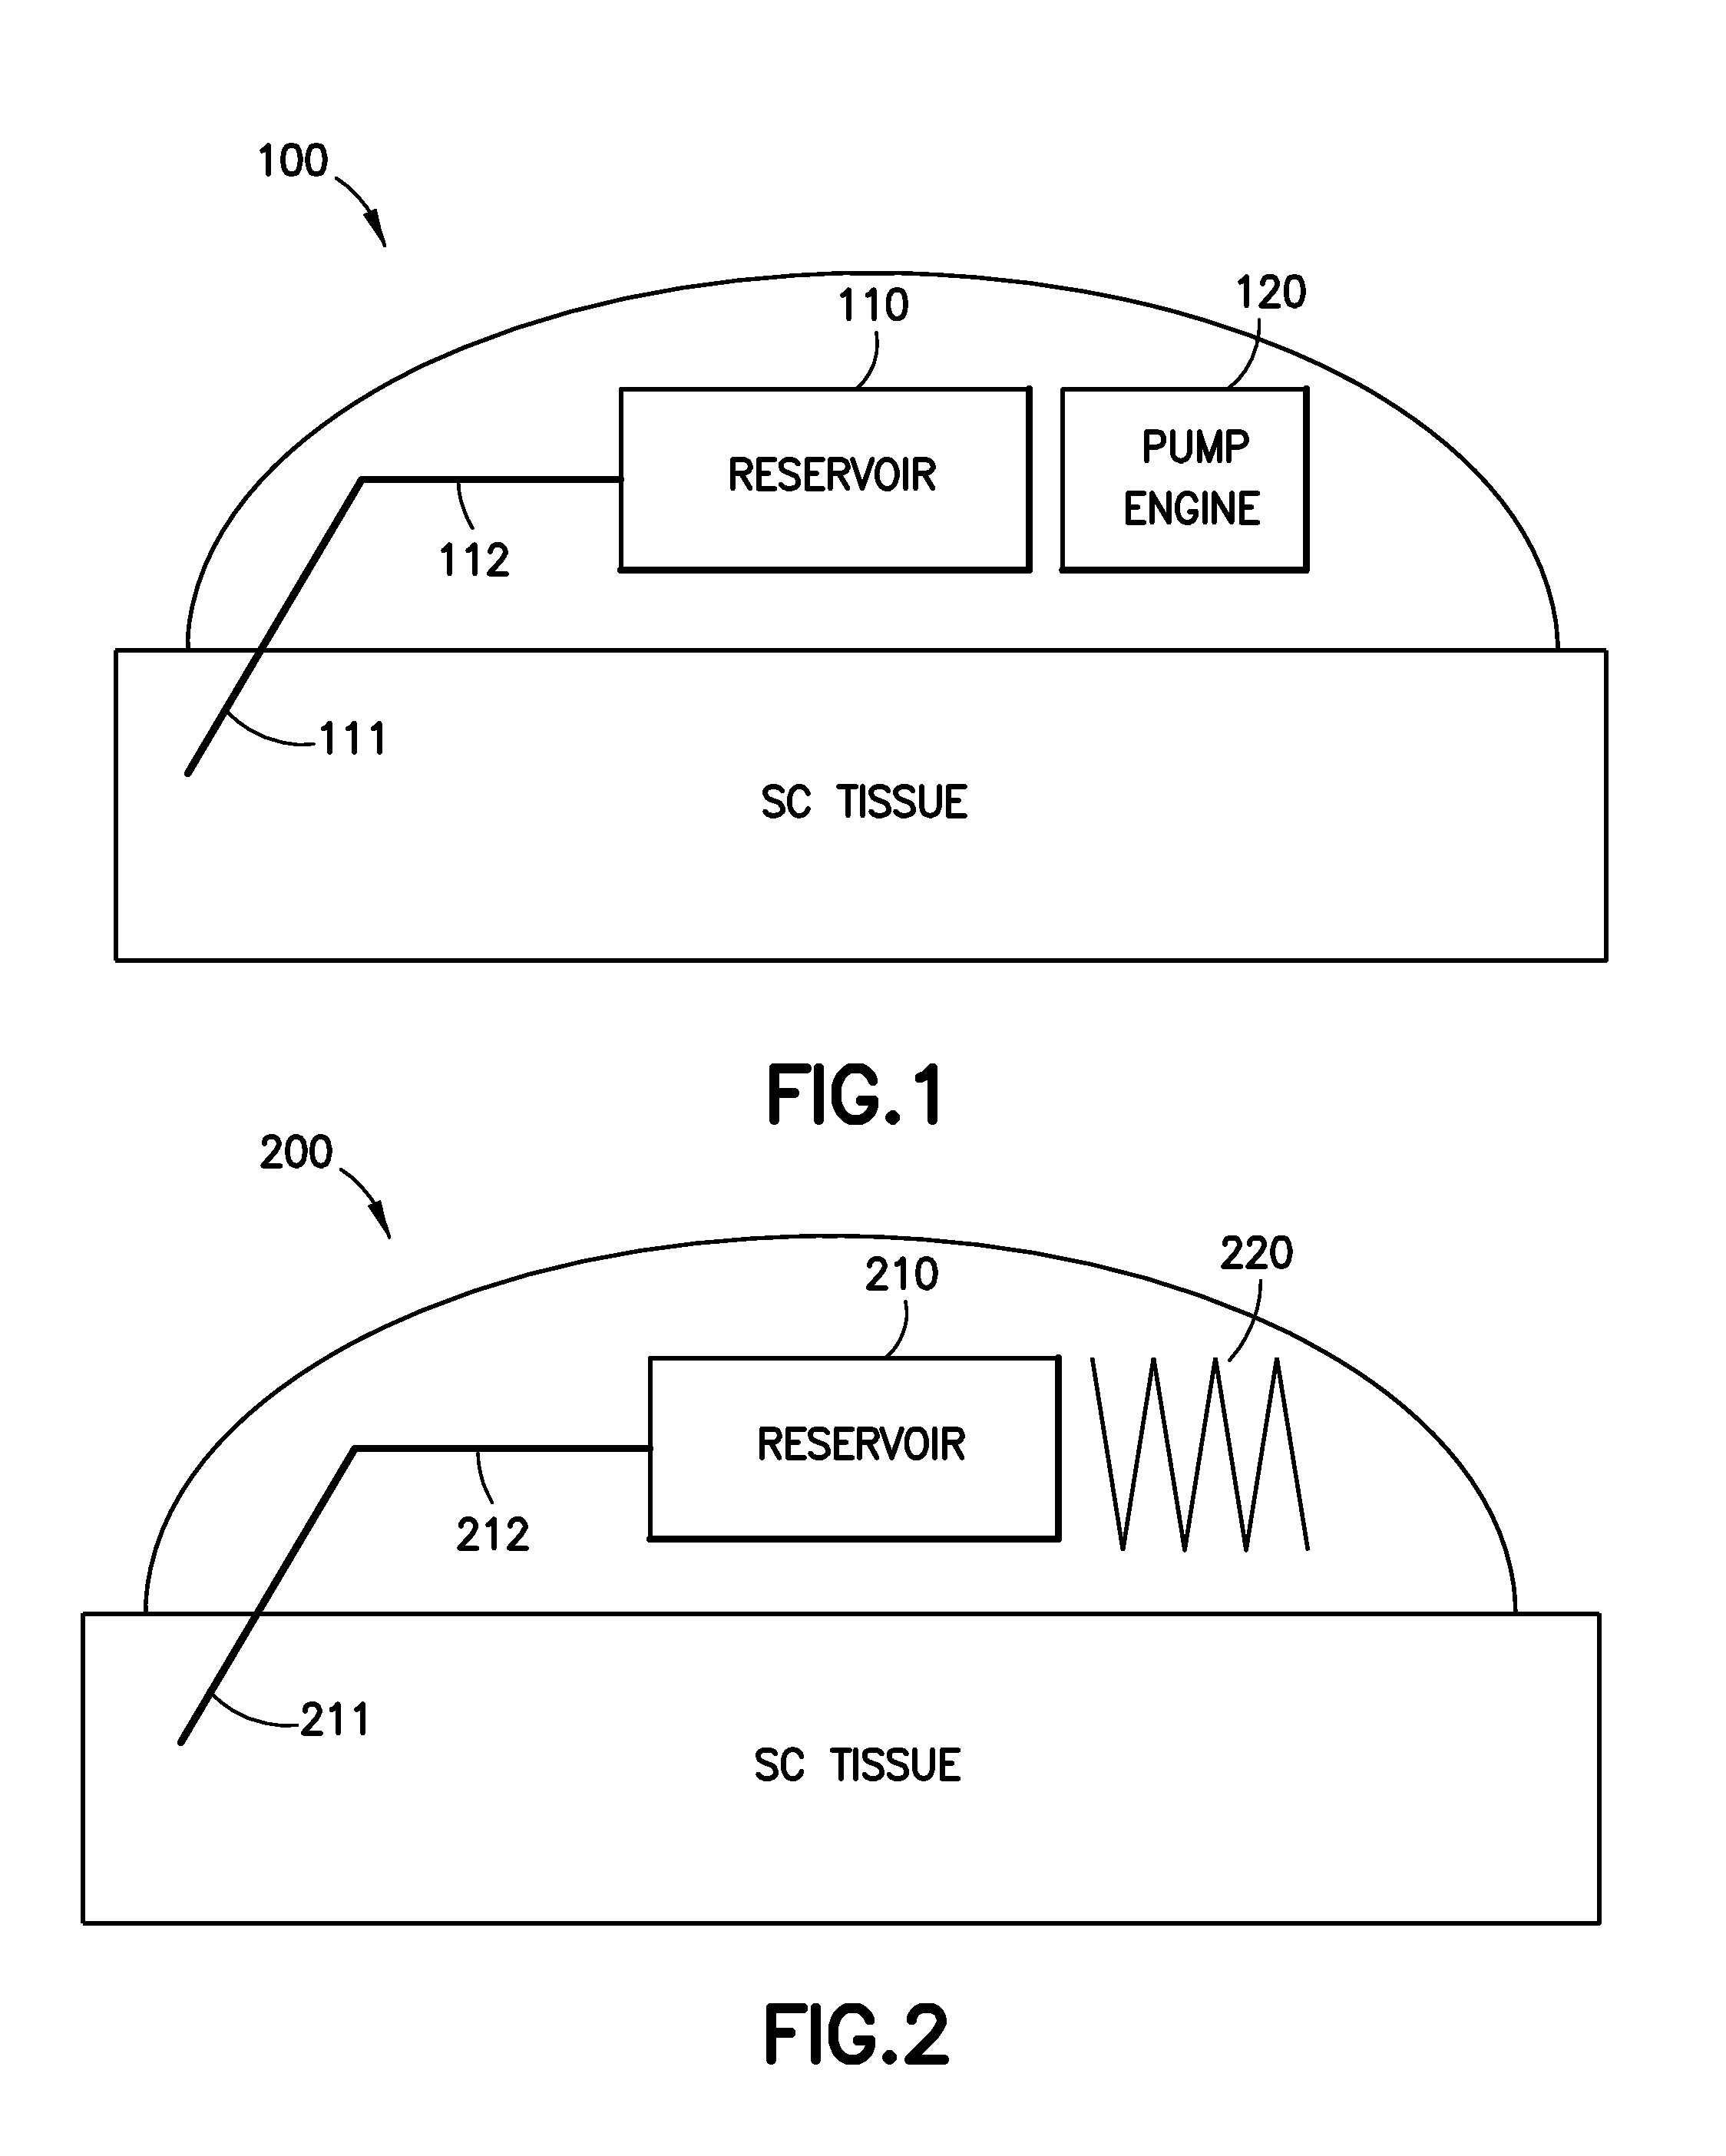 Pump engine with metering system for dispensing liquid medication